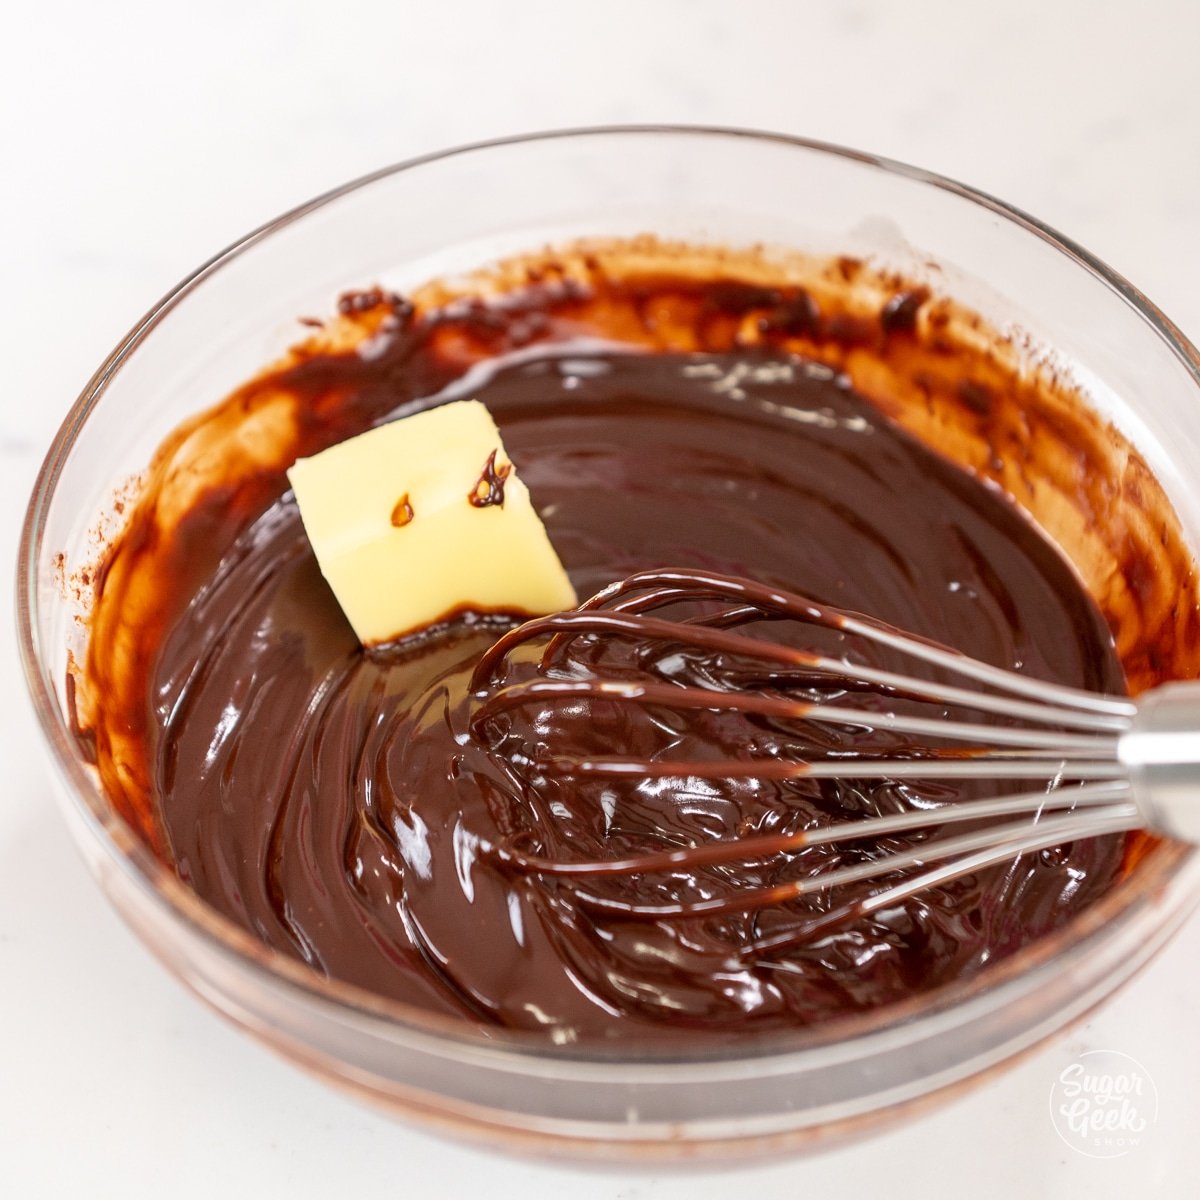 cube of butter in a bowl of dark chocolate ganache